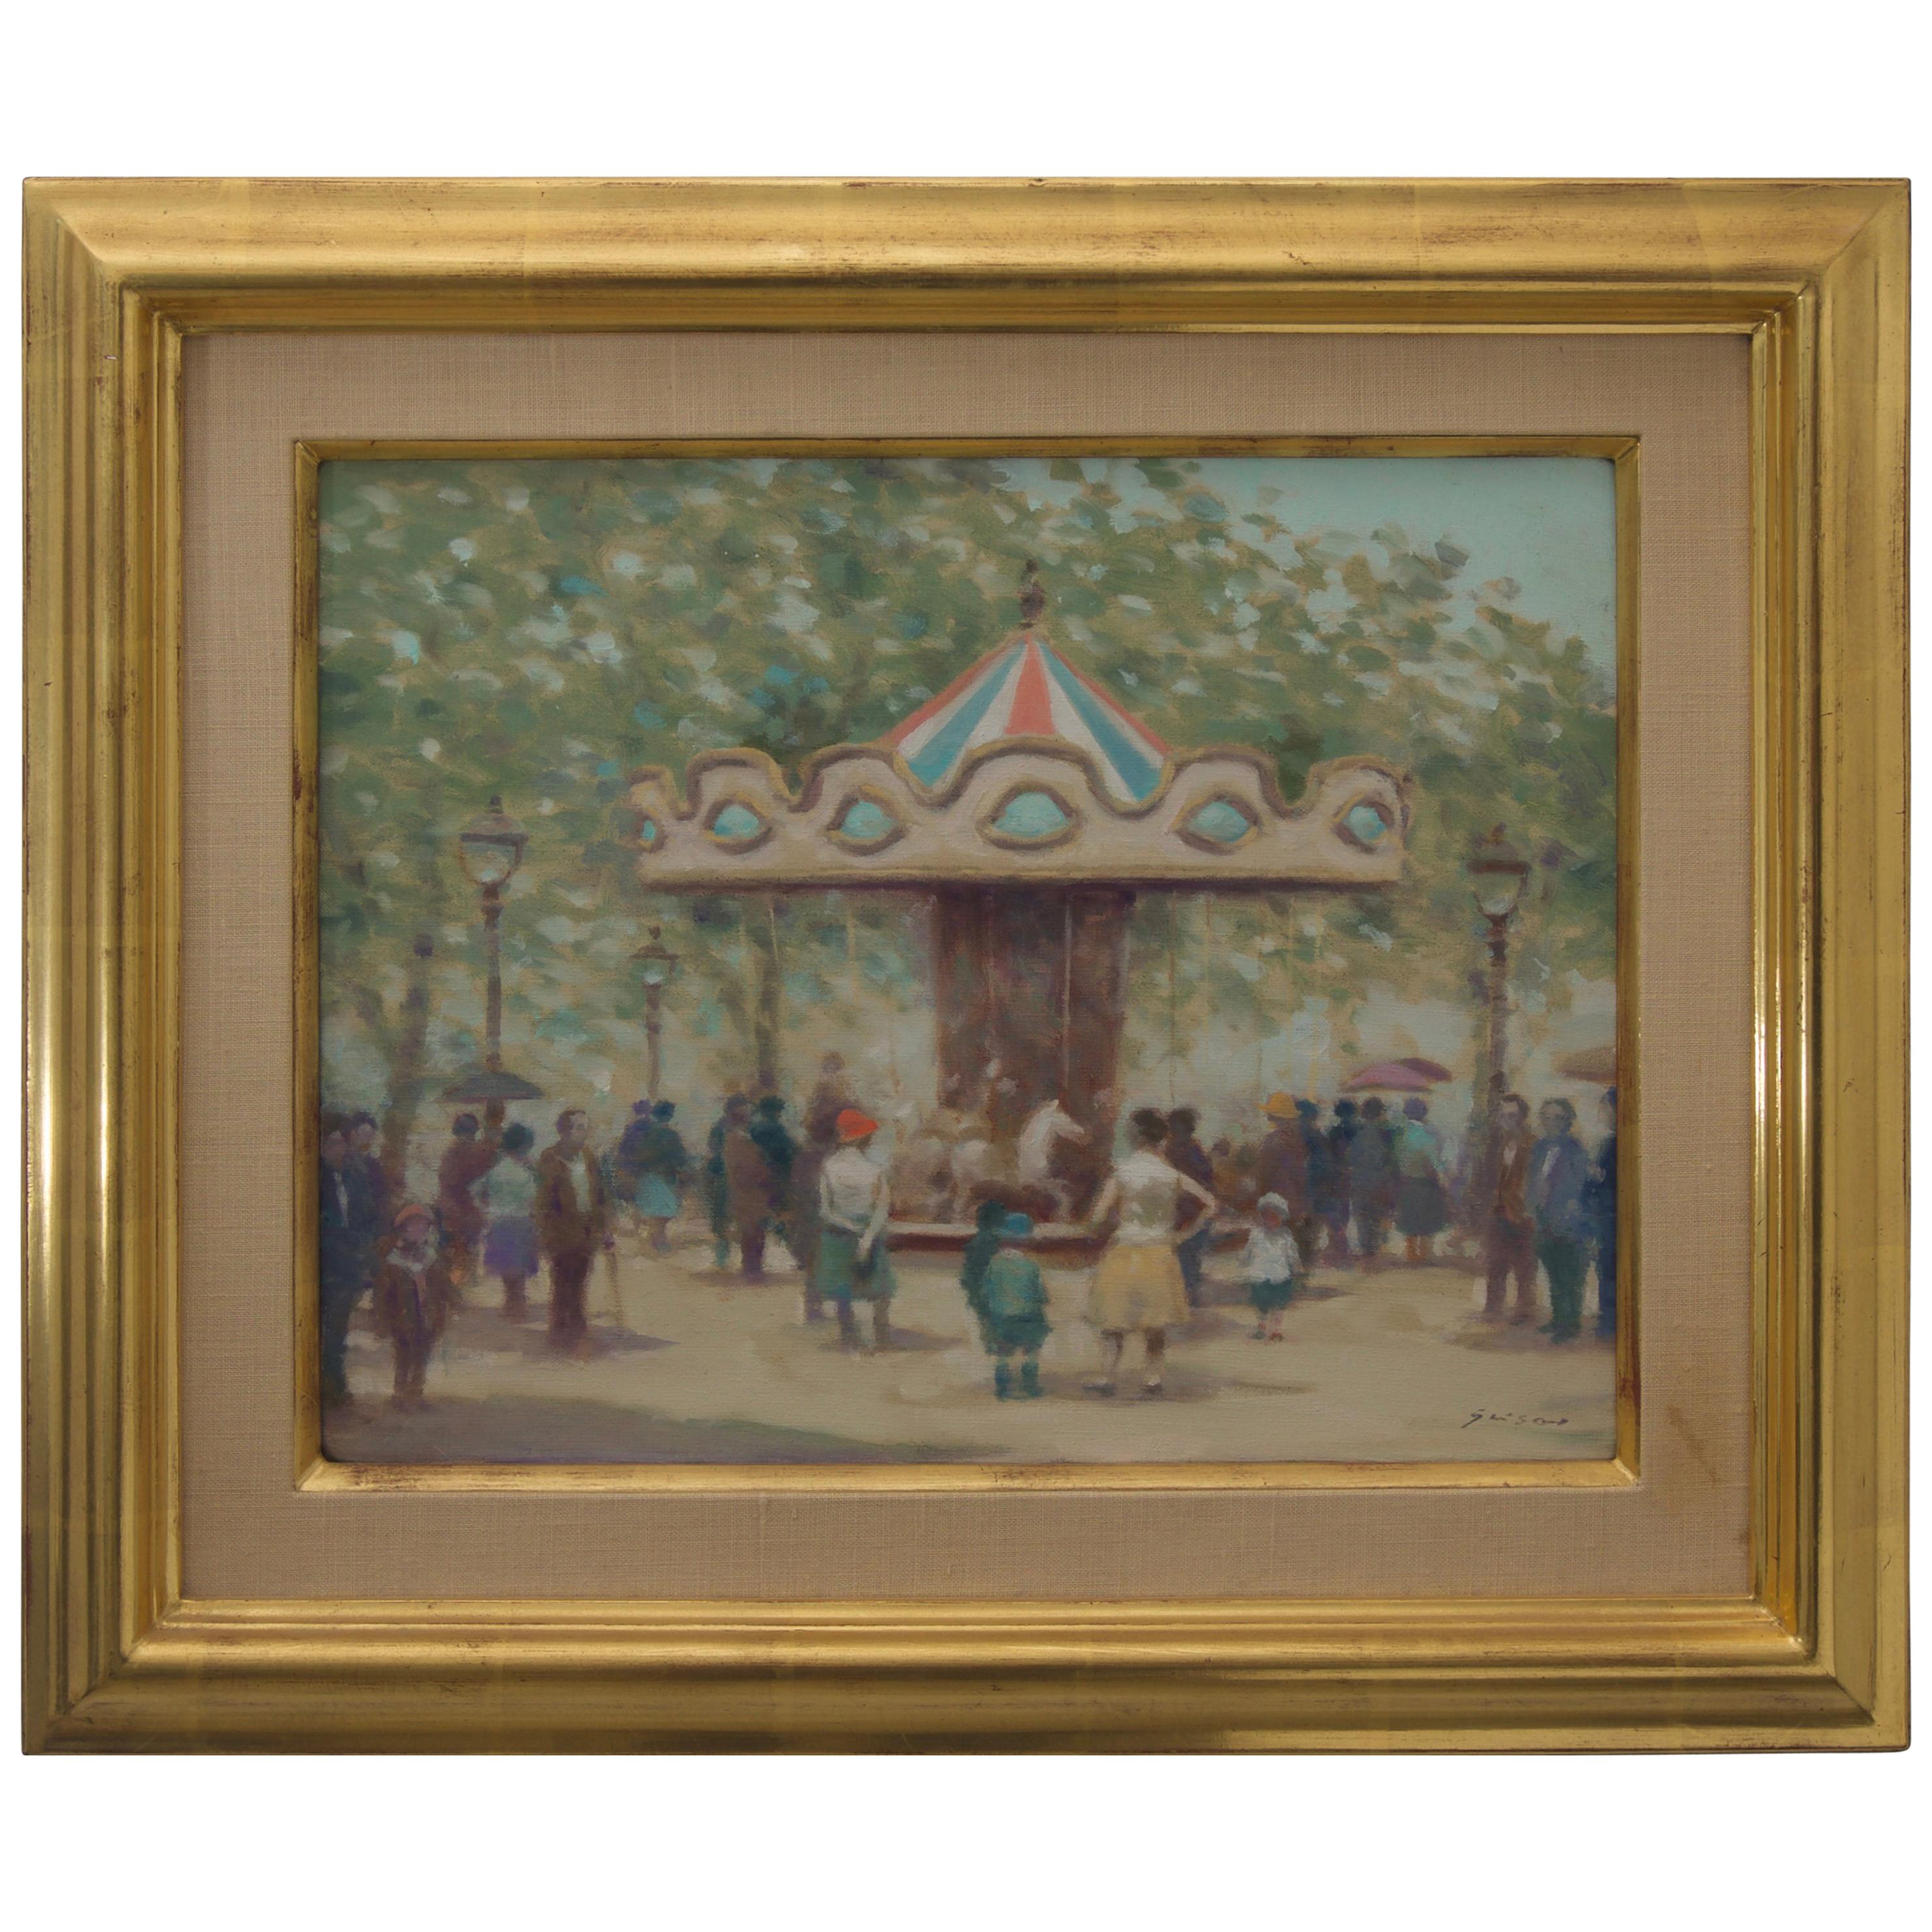 Oil on Canvas Painting Titled " Louvre Carousel "